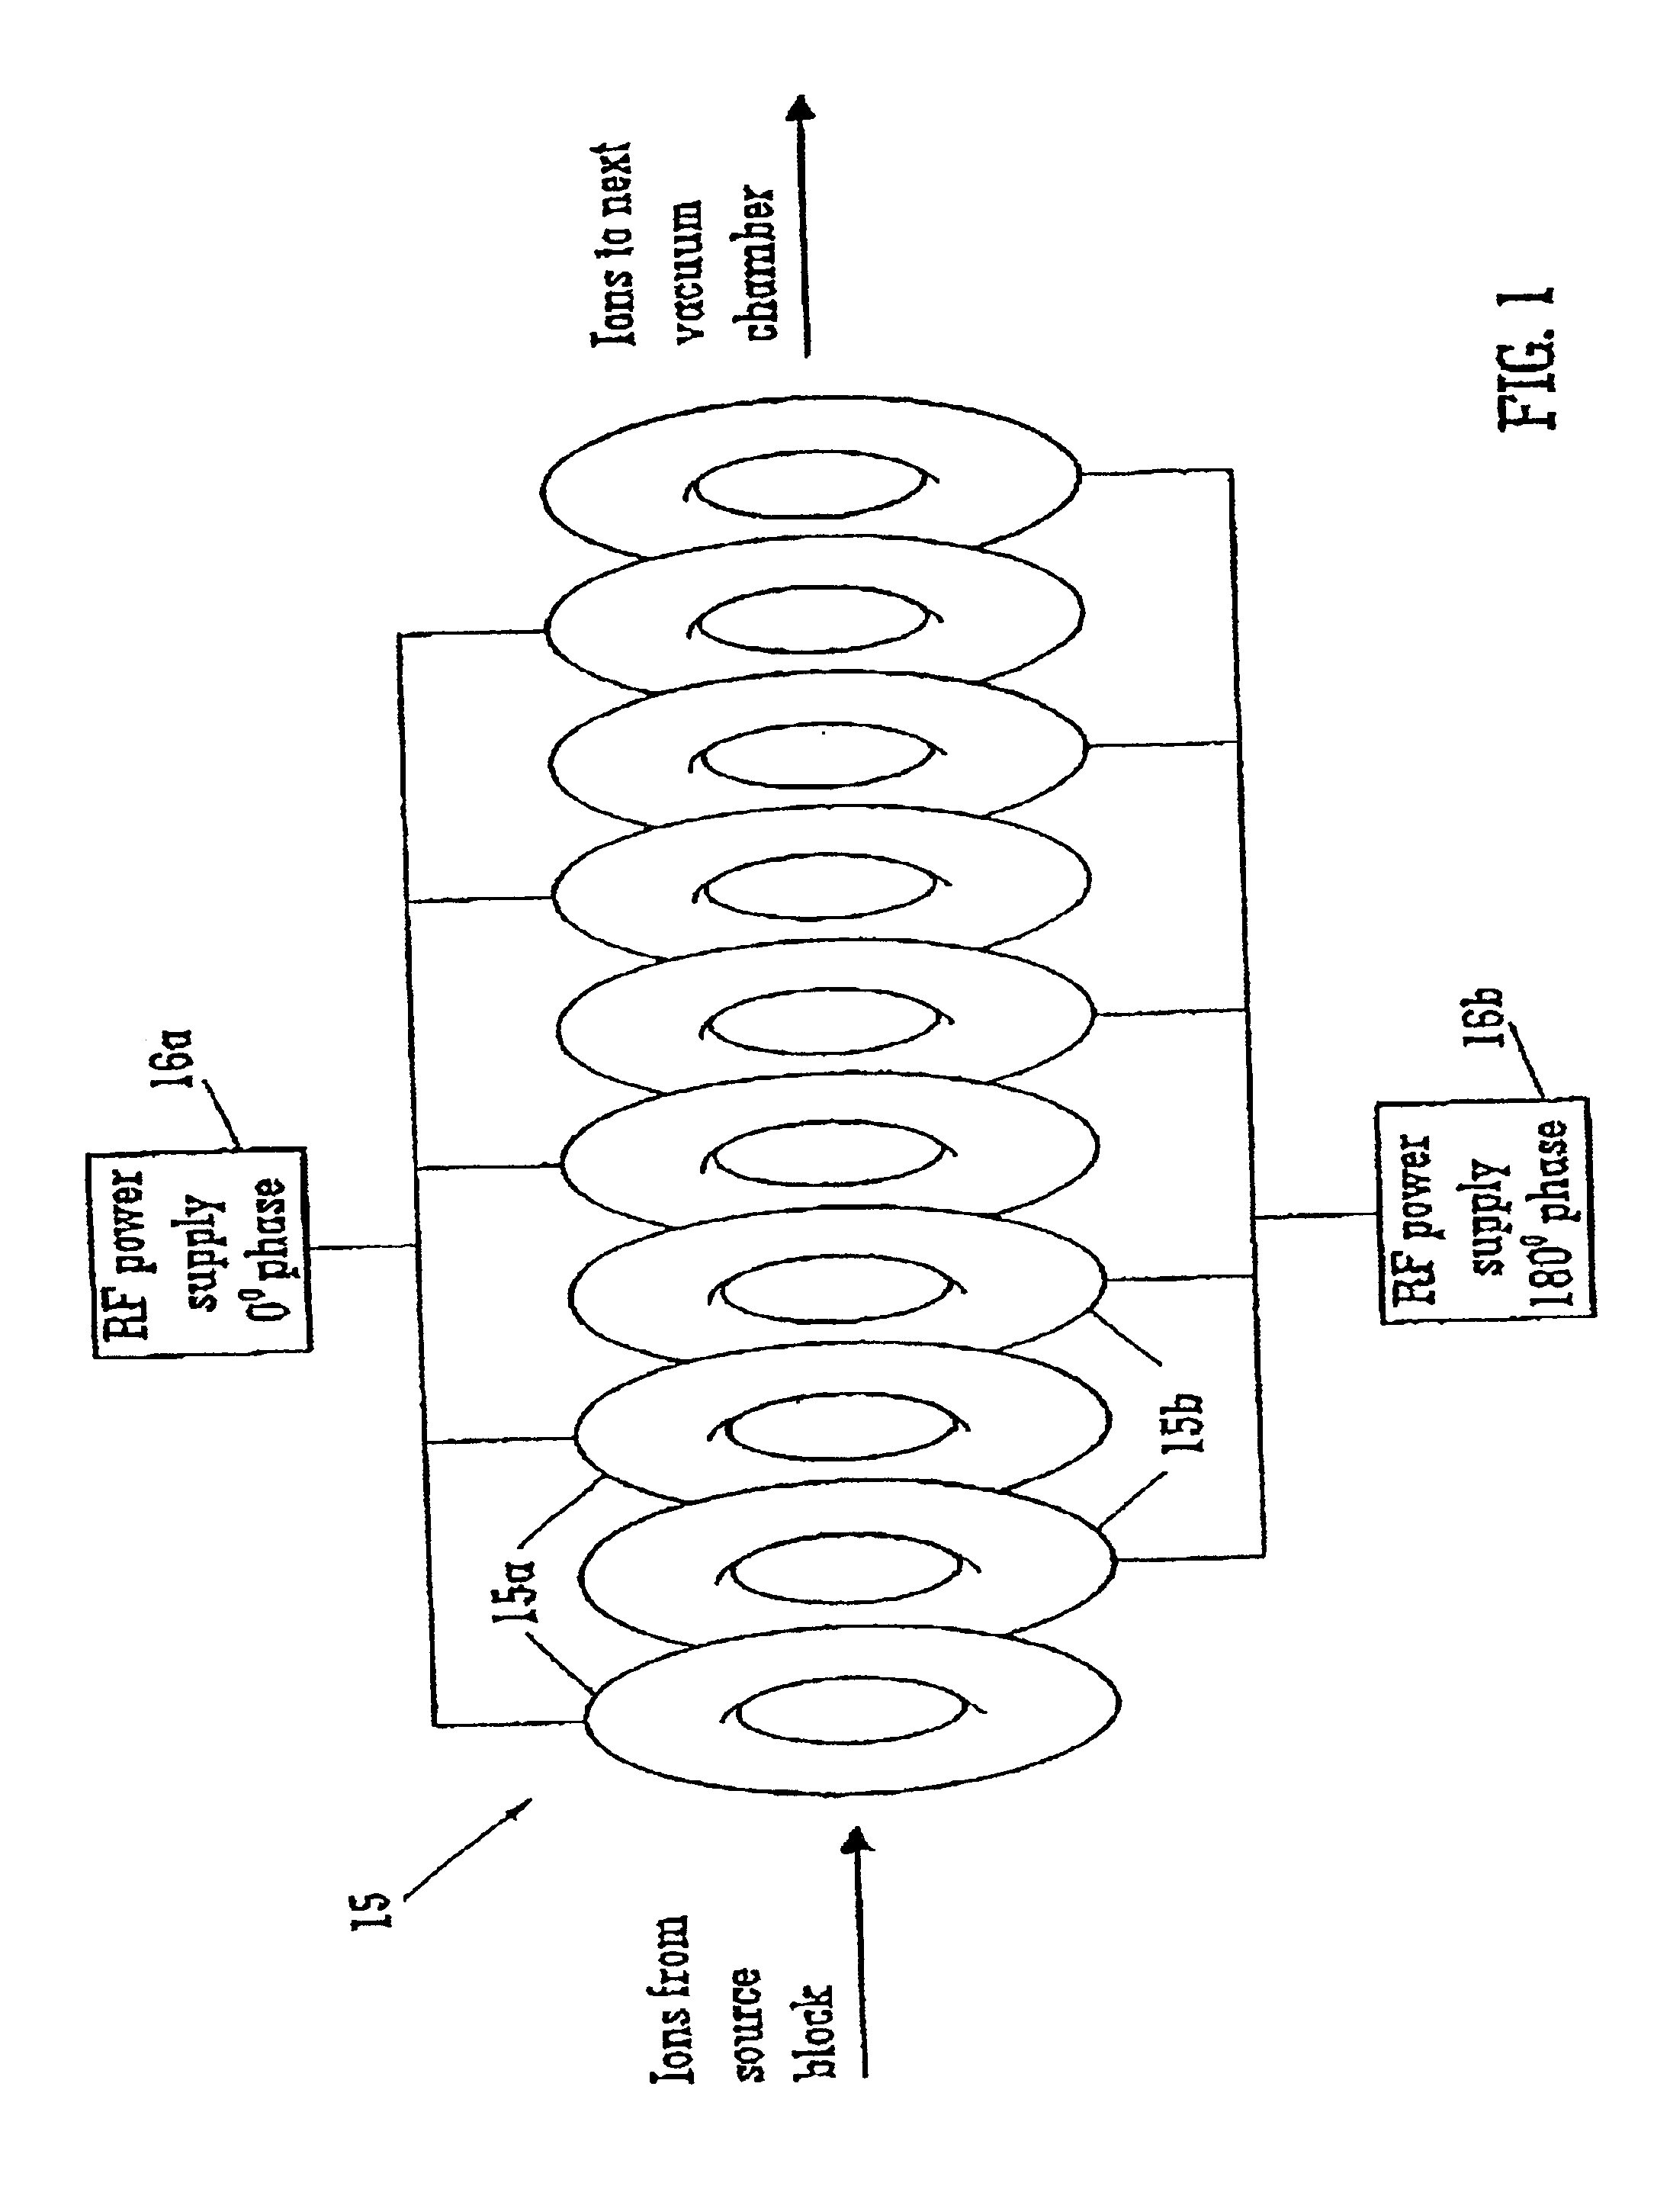 Mass spectrometers and methods of mass spectrometry